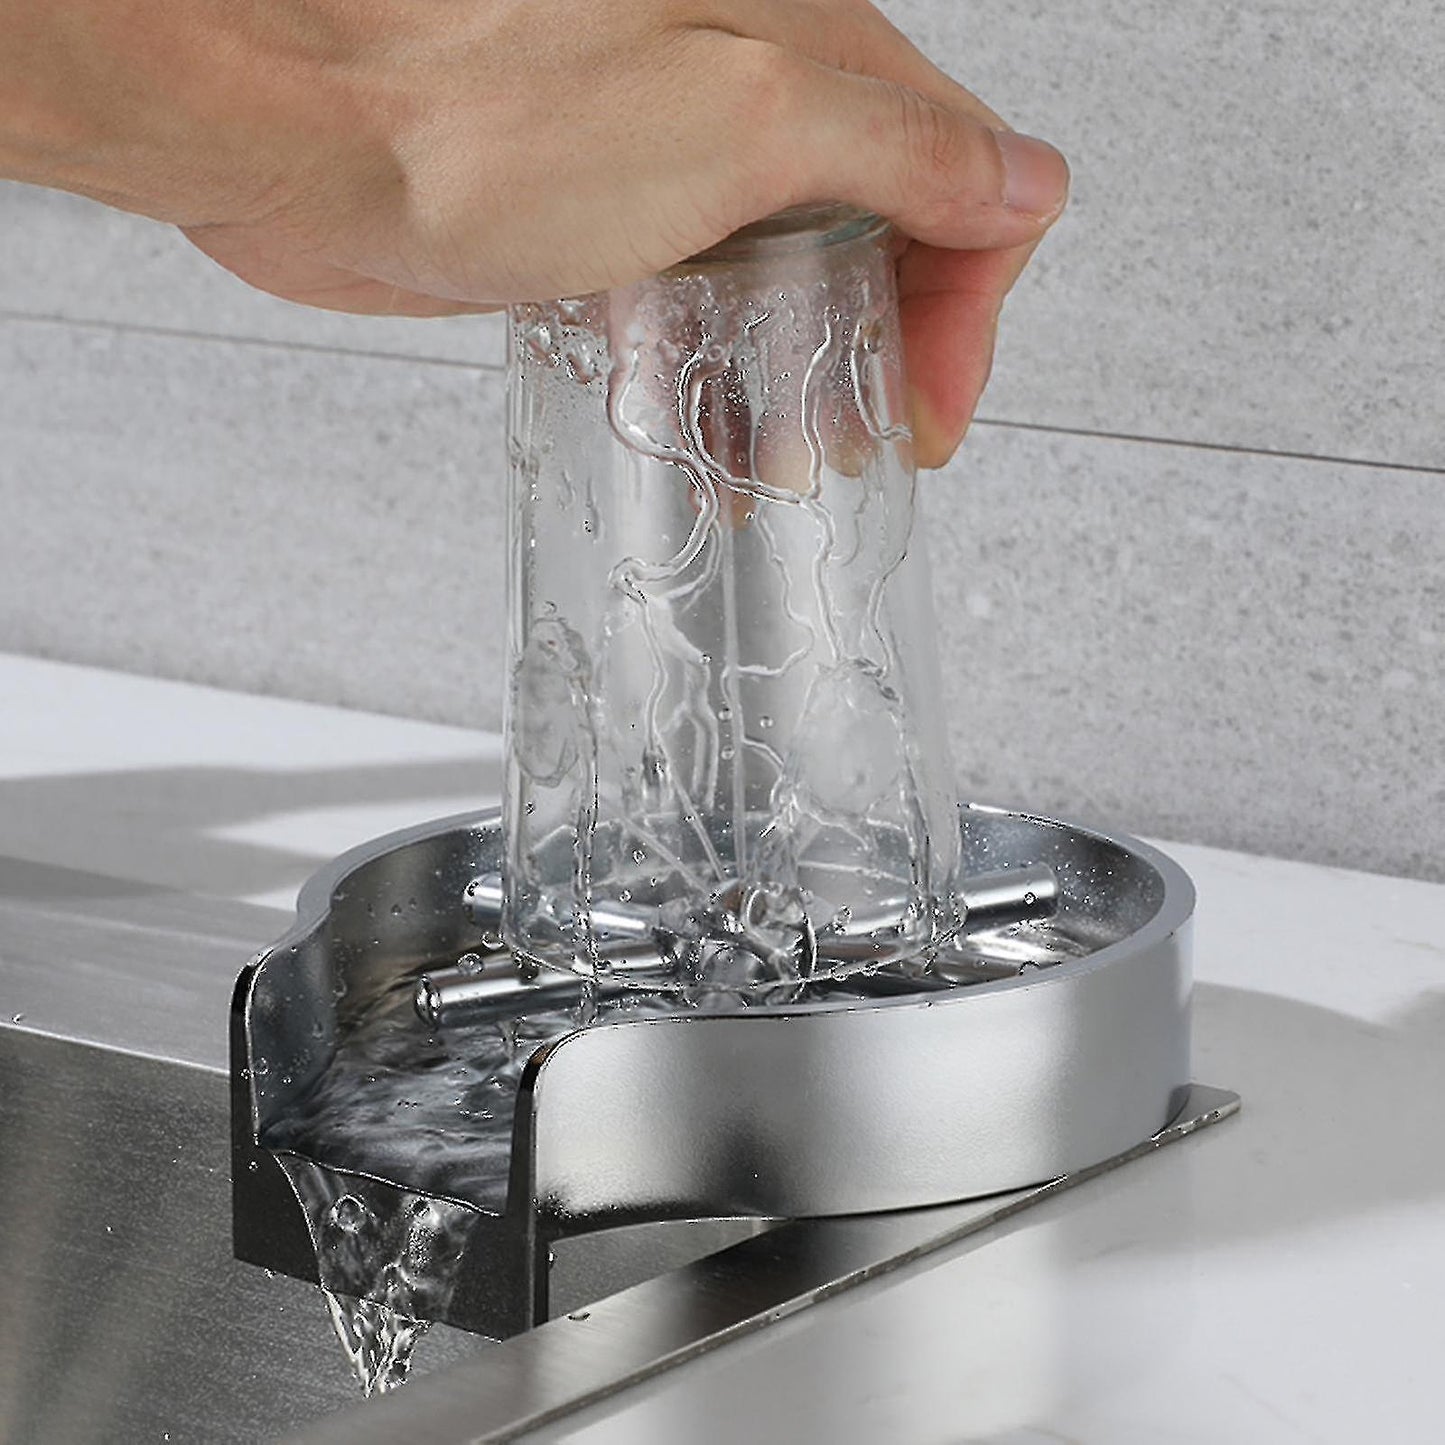 AquaShine™: The Ultimate High-Pressure Stainless Steel Glass Cleanser